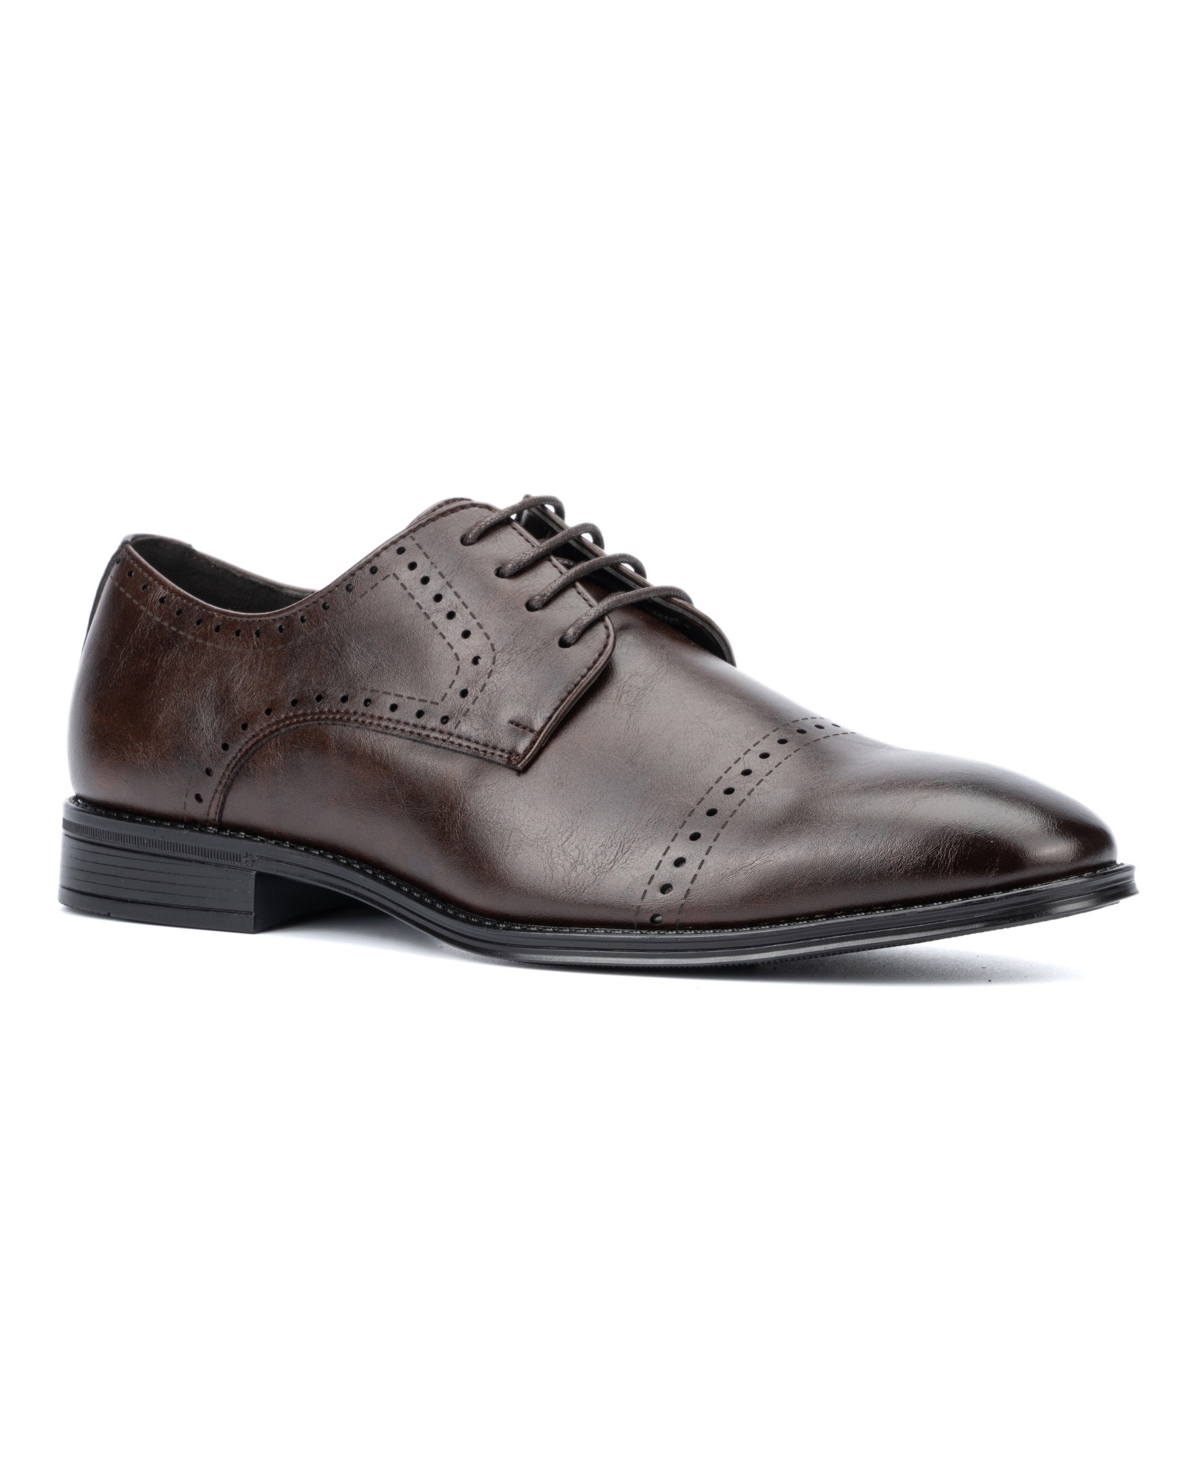 X-ray Men's Dionis Cap Toe Oxford Shoes In Brown